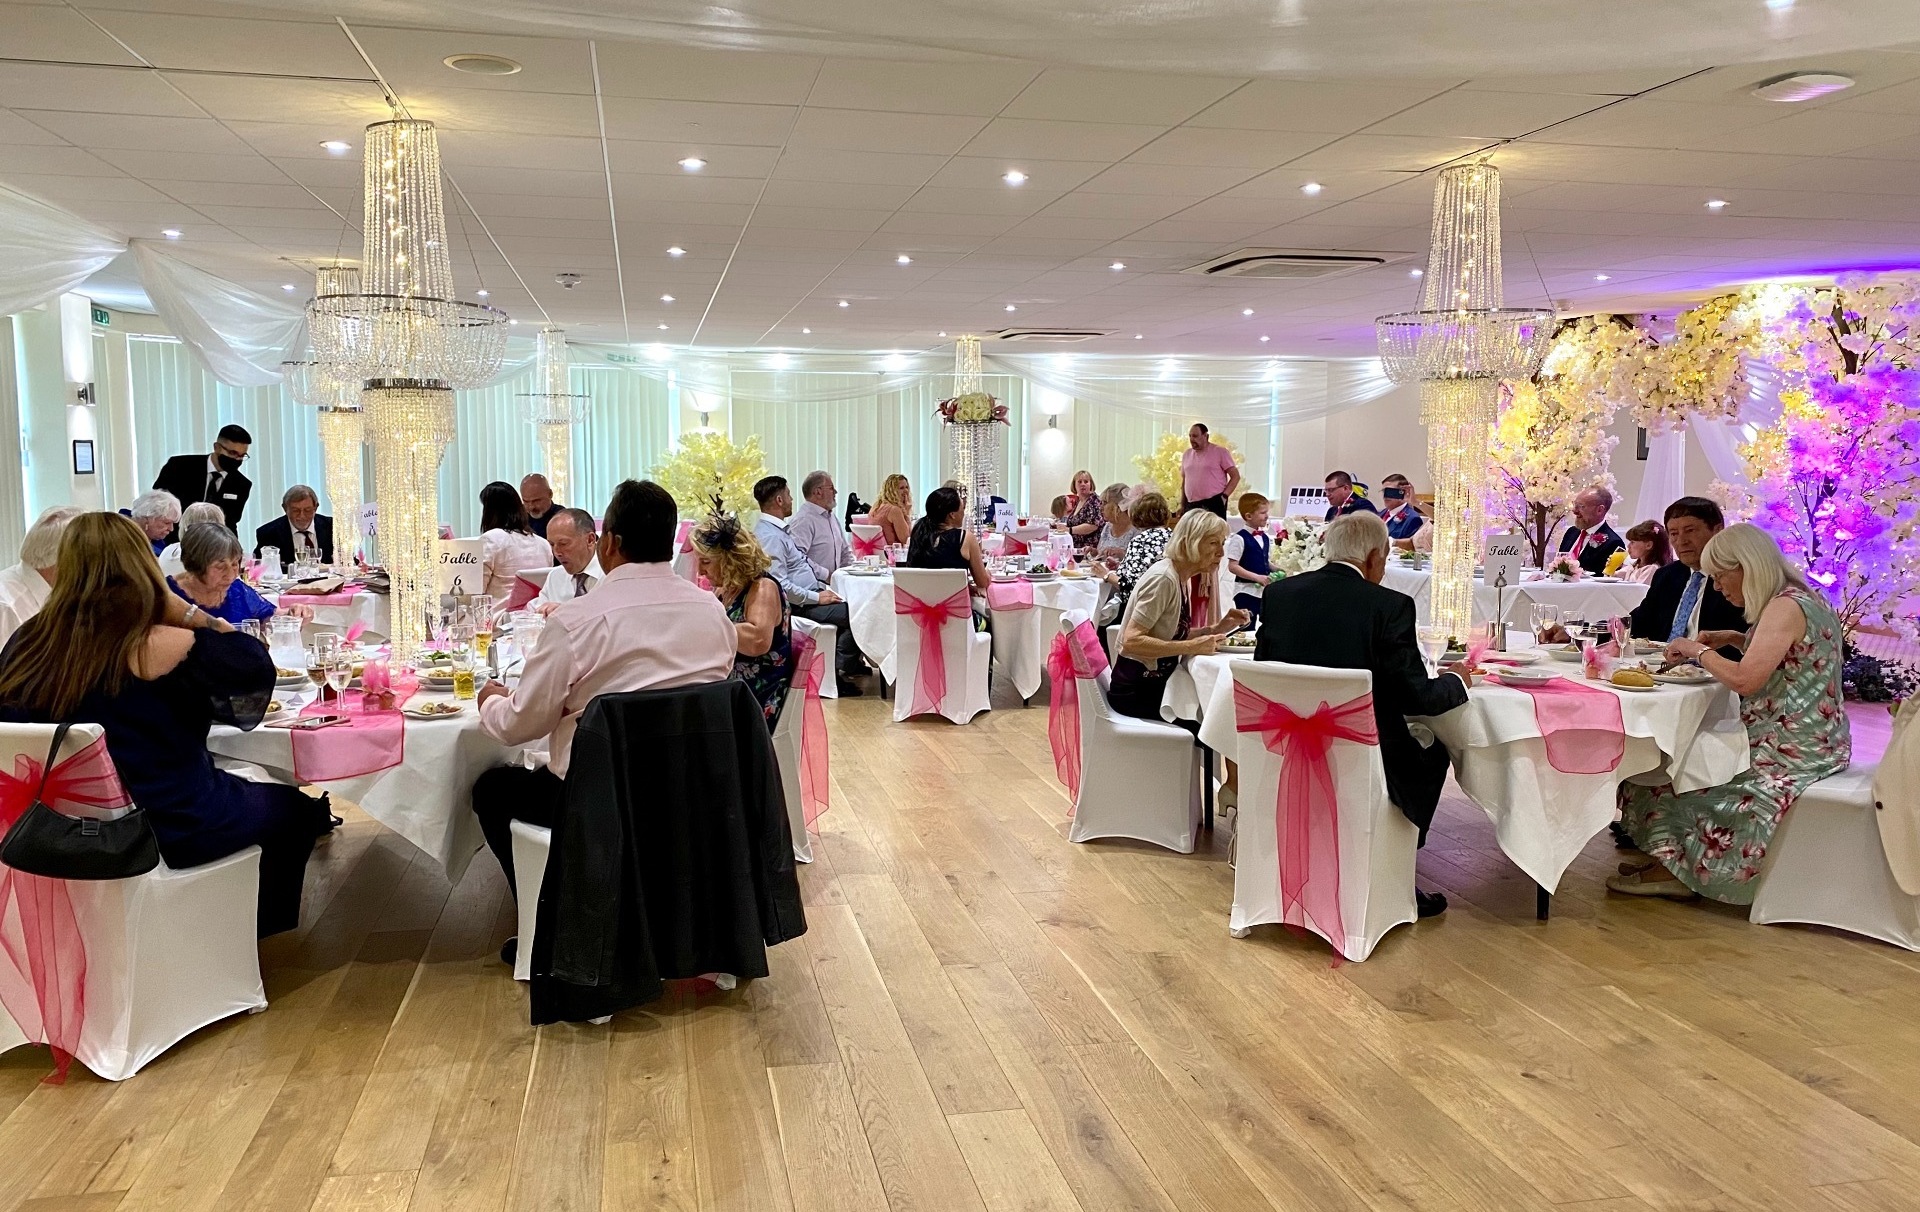 Wedding party in full swing with pink decorations